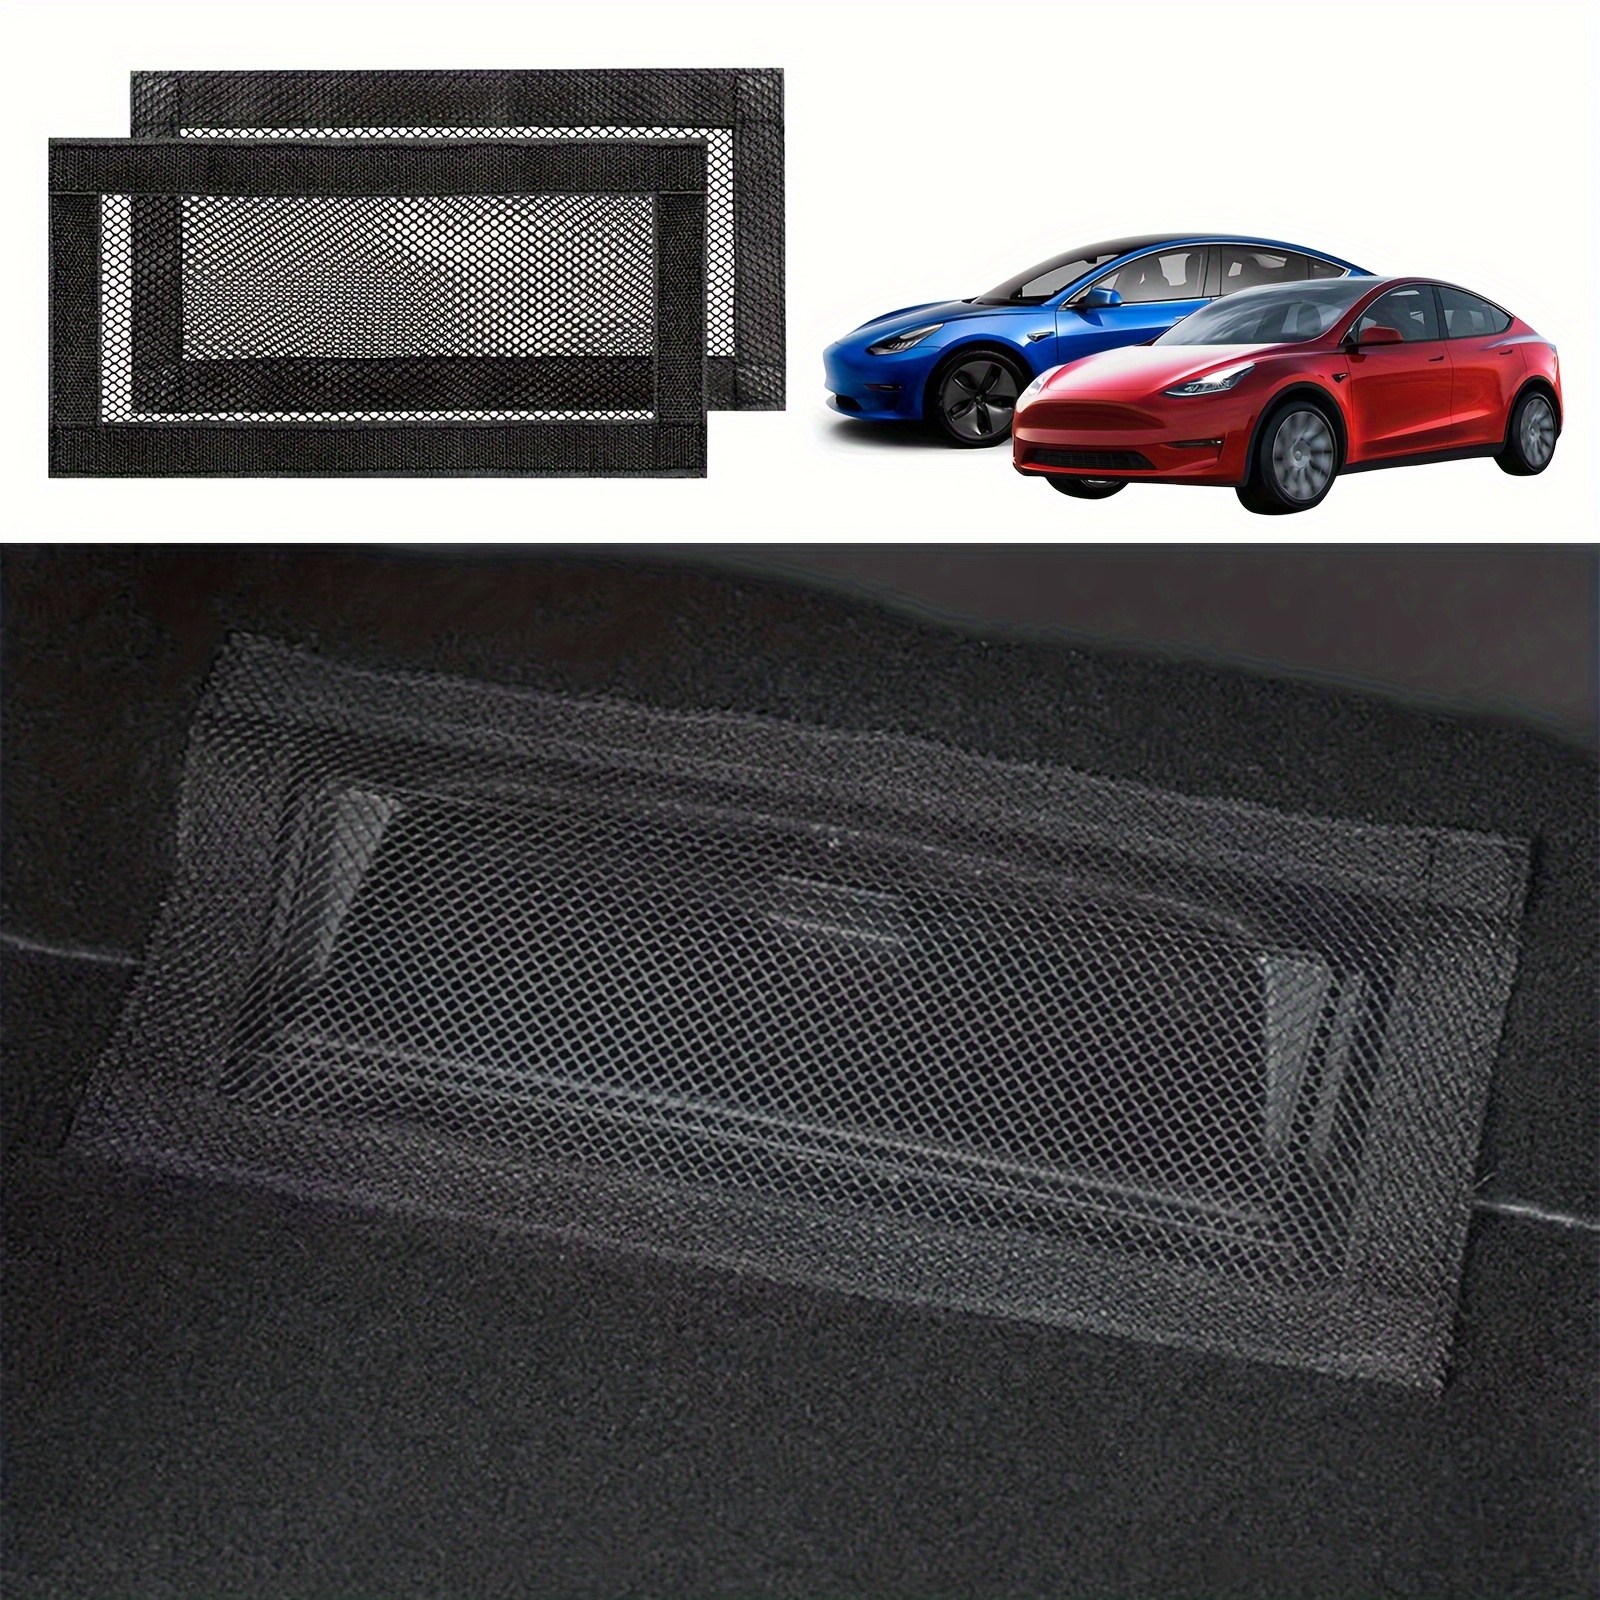 

2pcs Backseat Air Vent Cover Grilles Protector Rear Seat Air Condition Outlet Air Flow Vent Protection Covers Net For Tesla For For Model Y